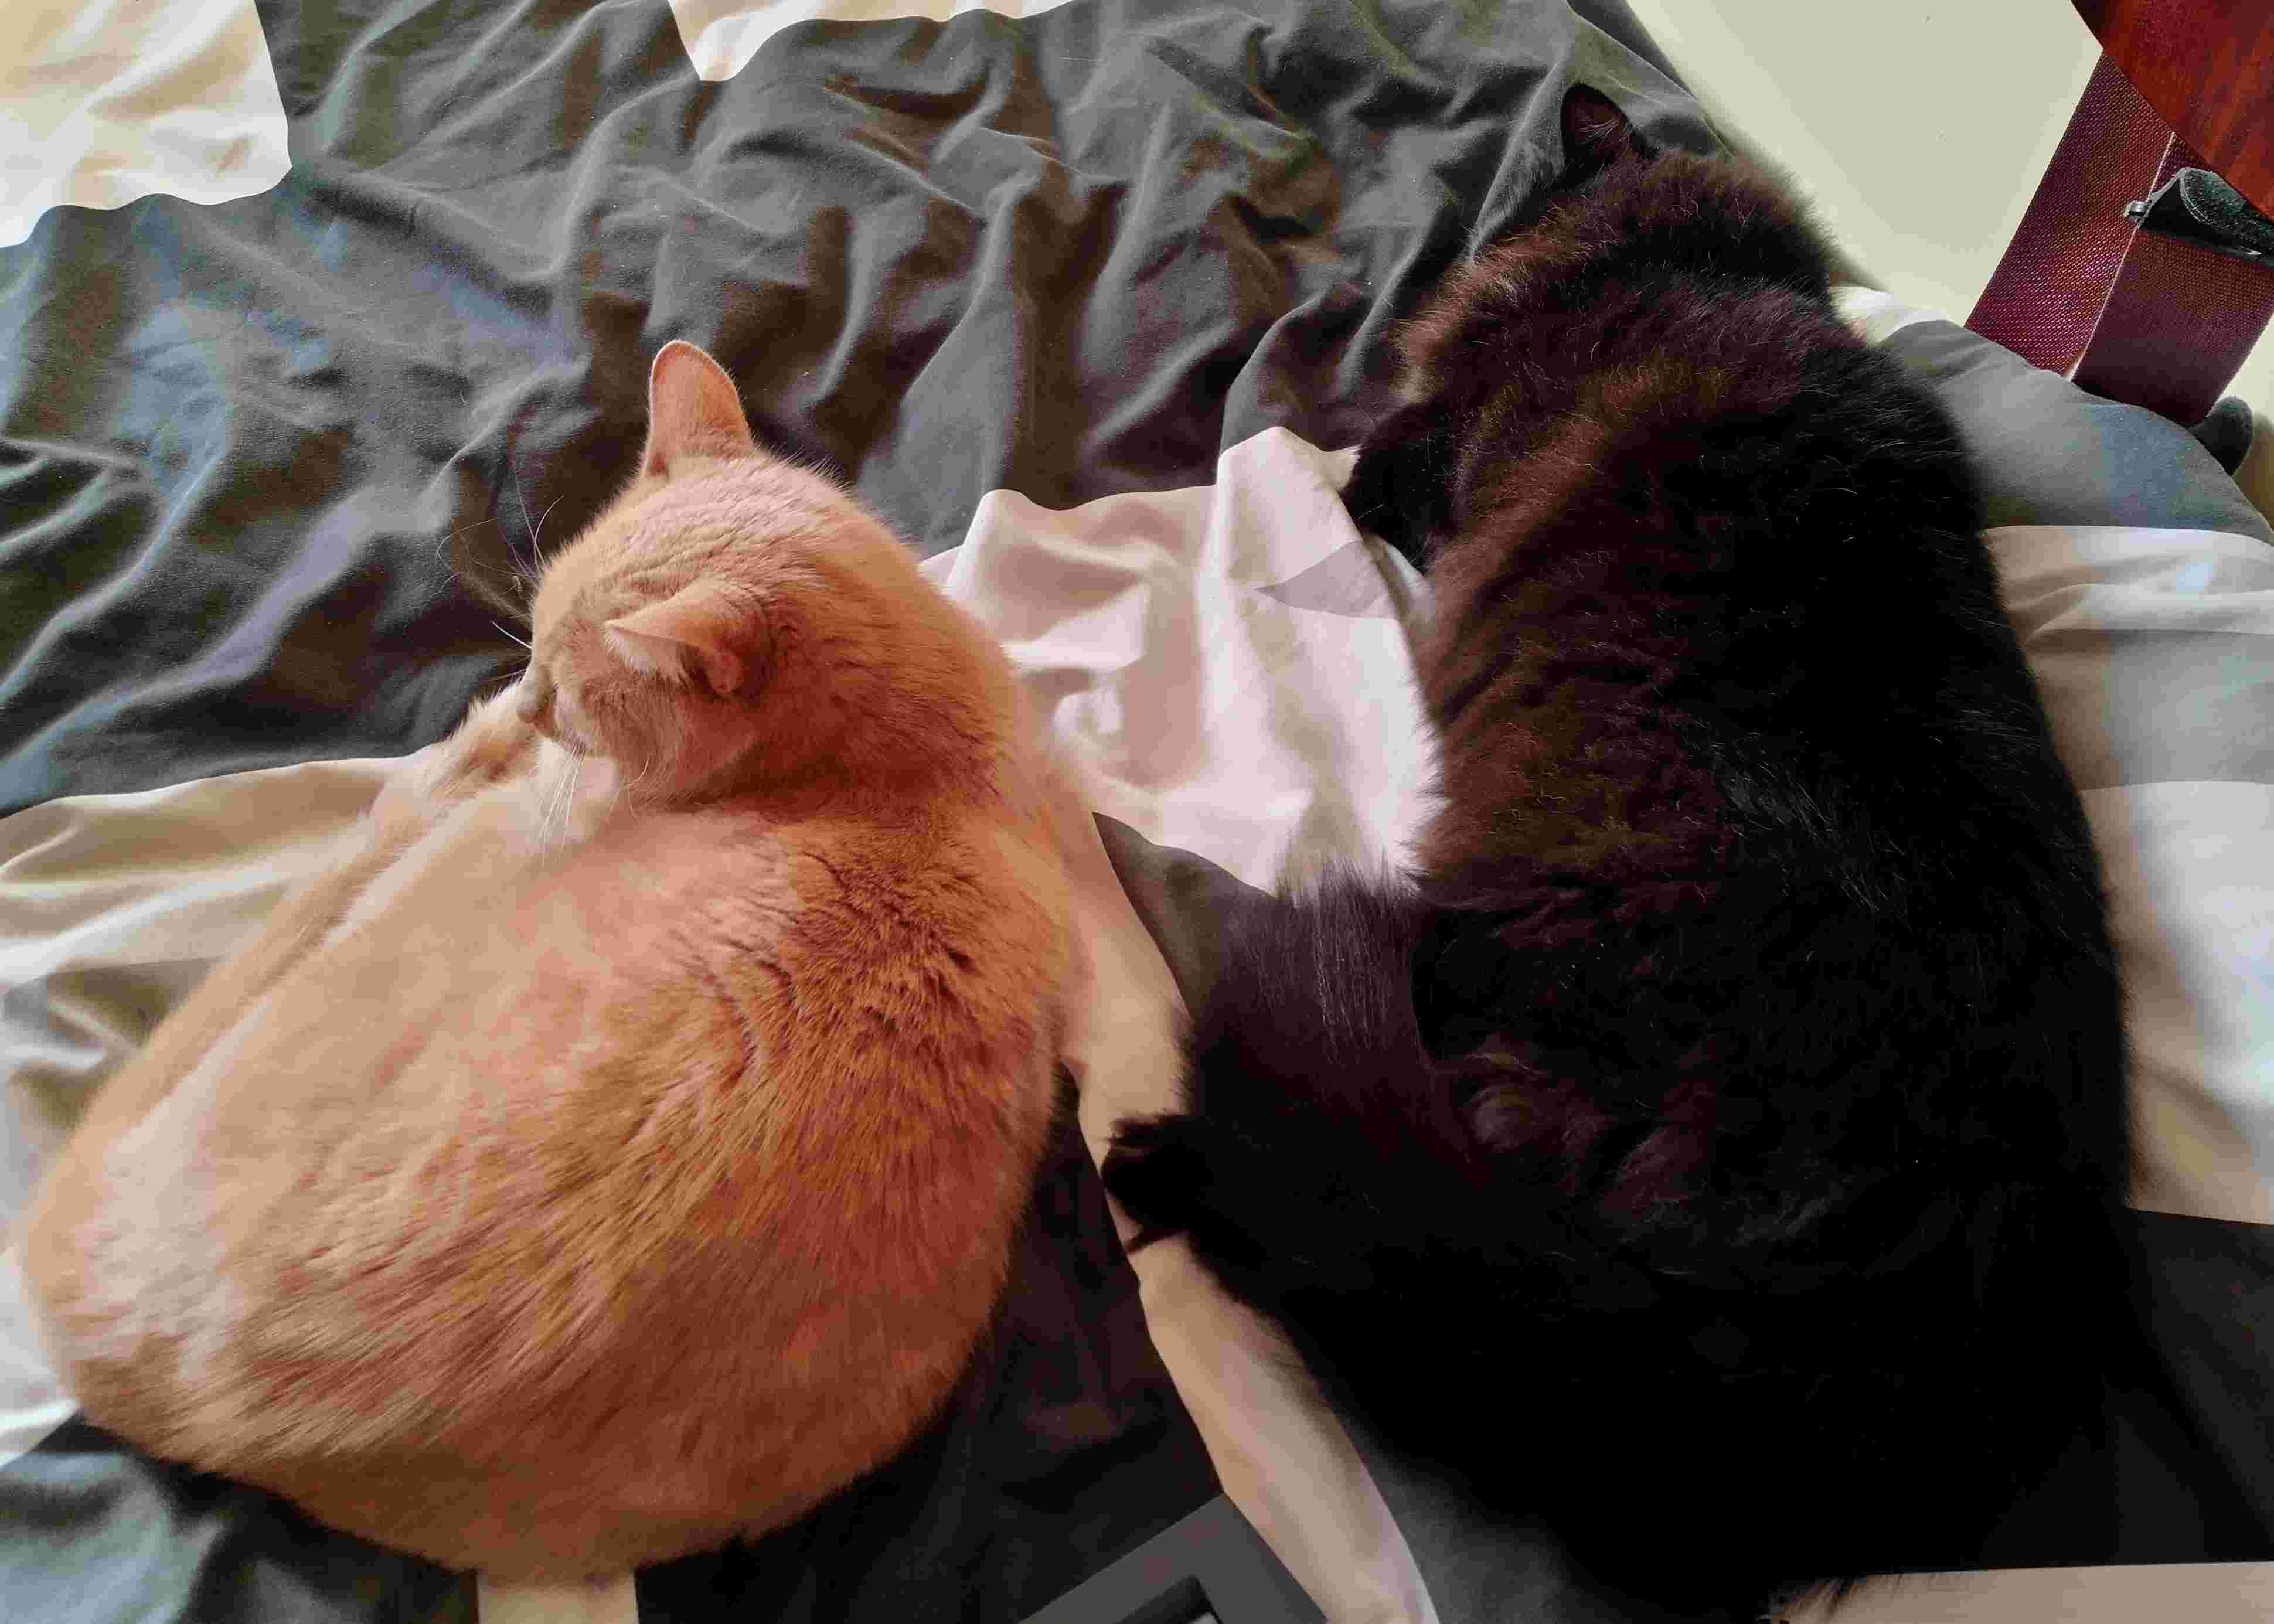 A ginger cat and a black cat sleeping together